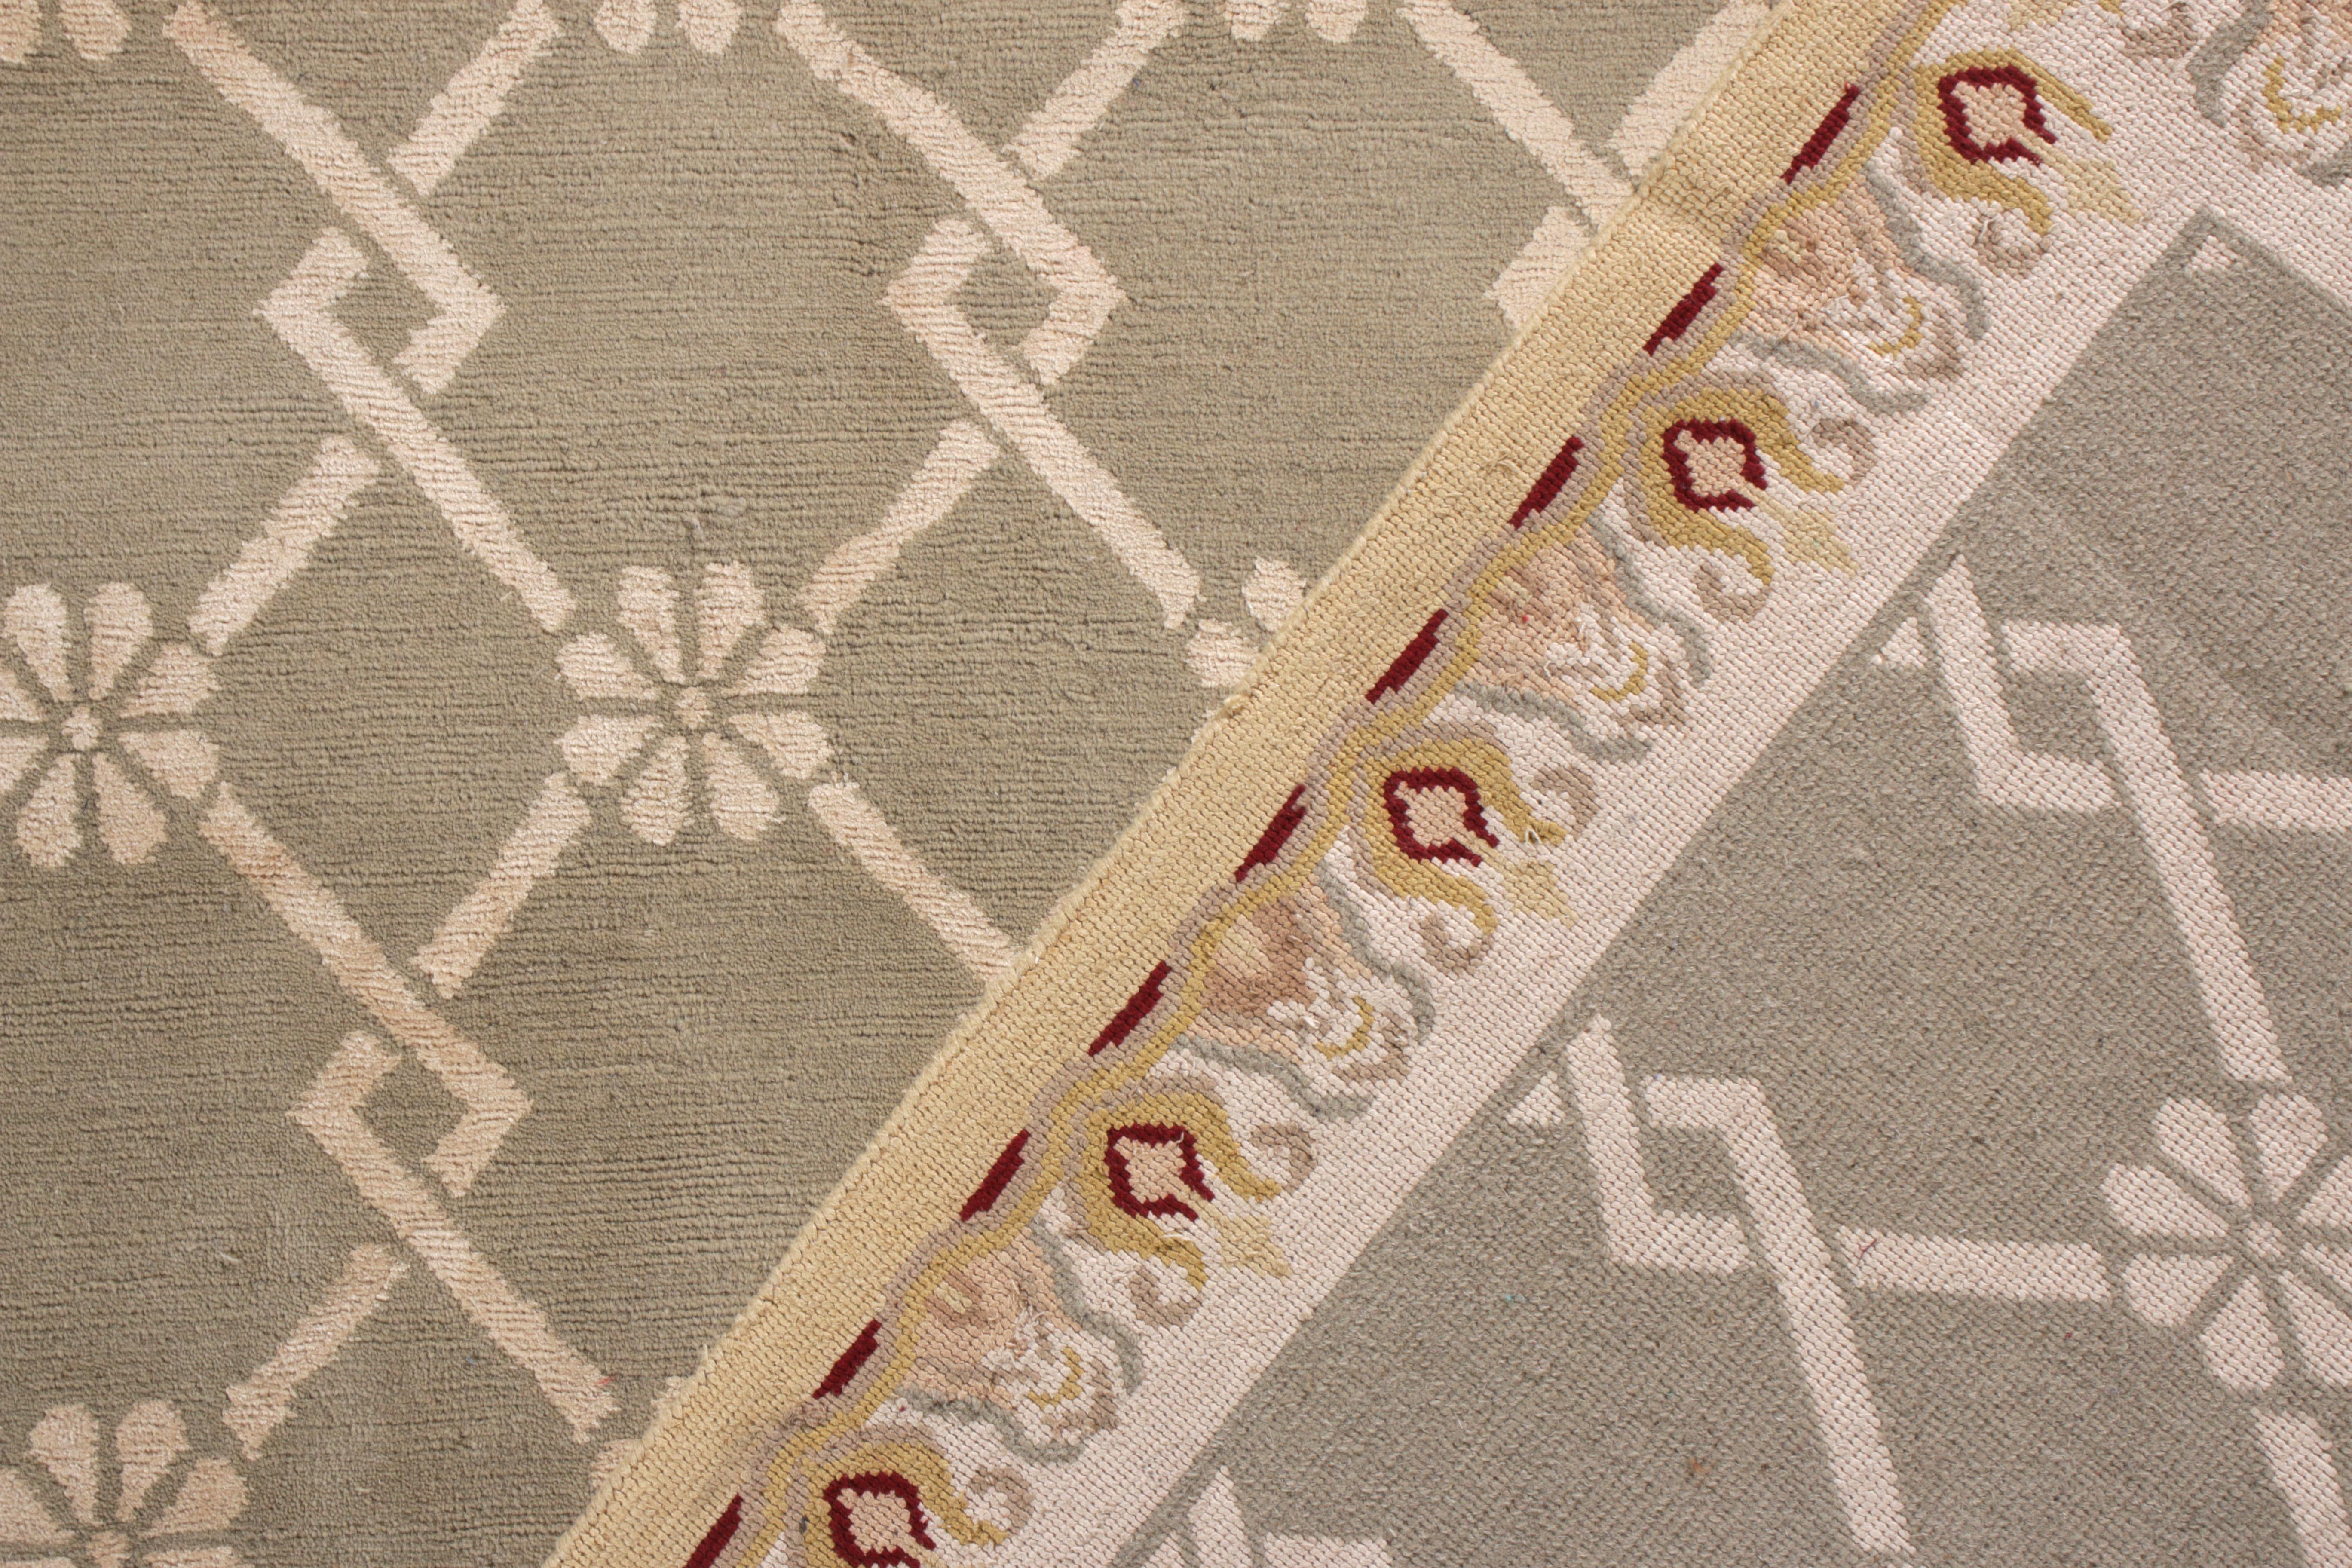 Rug & Kilim's Hand Knotted Aubusson Style Rug in Beige-Brown Medallion Pattern In New Condition For Sale In Long Island City, NY